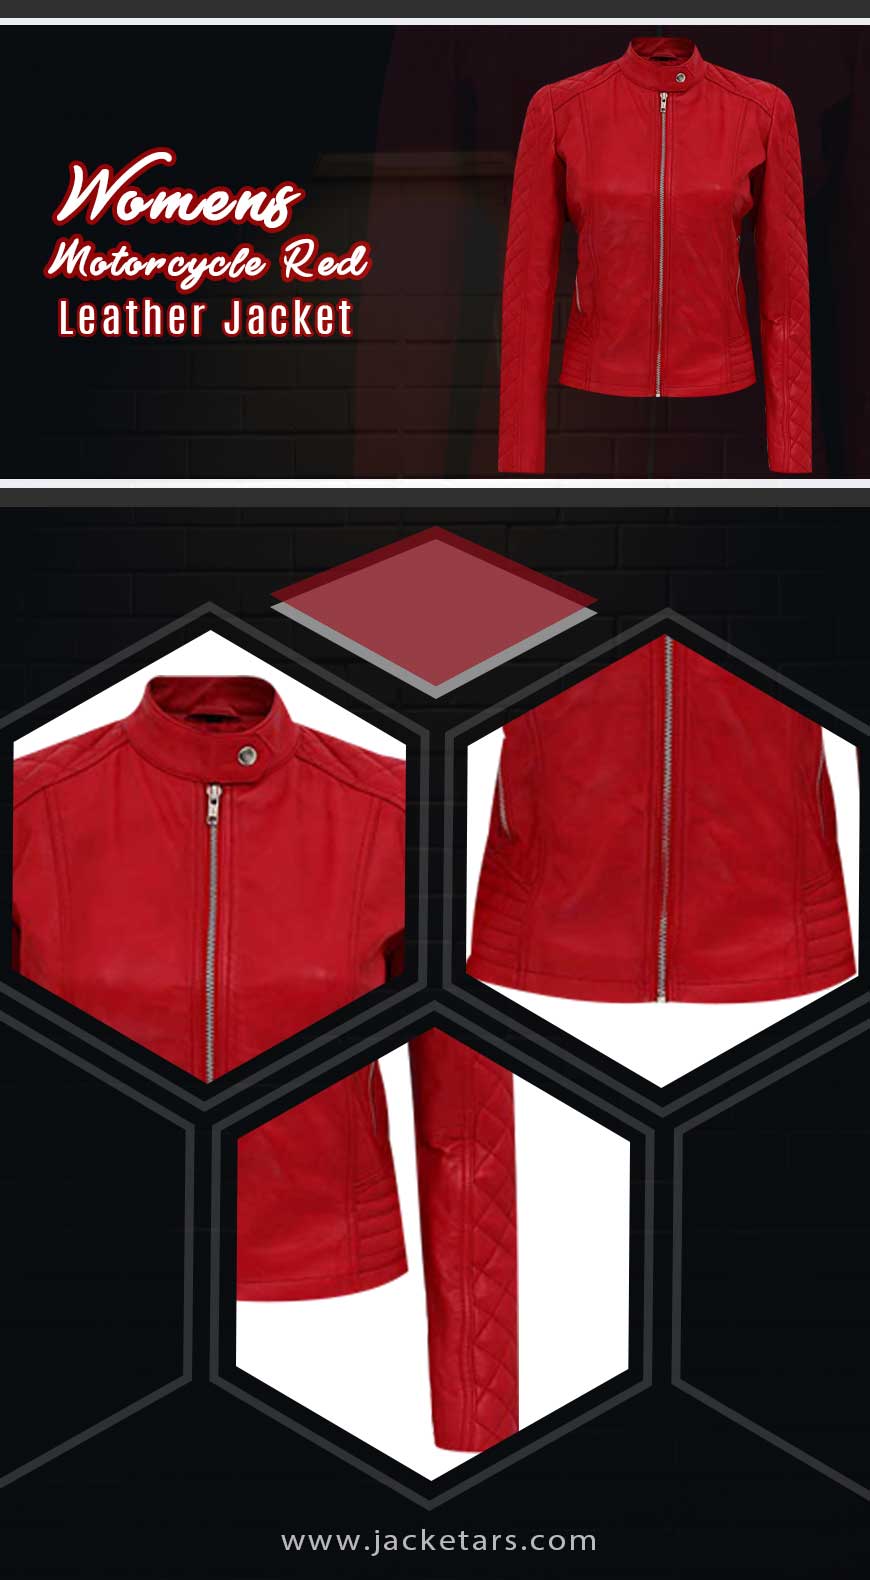 Womens Motorcycle Red Leather Jacket Info